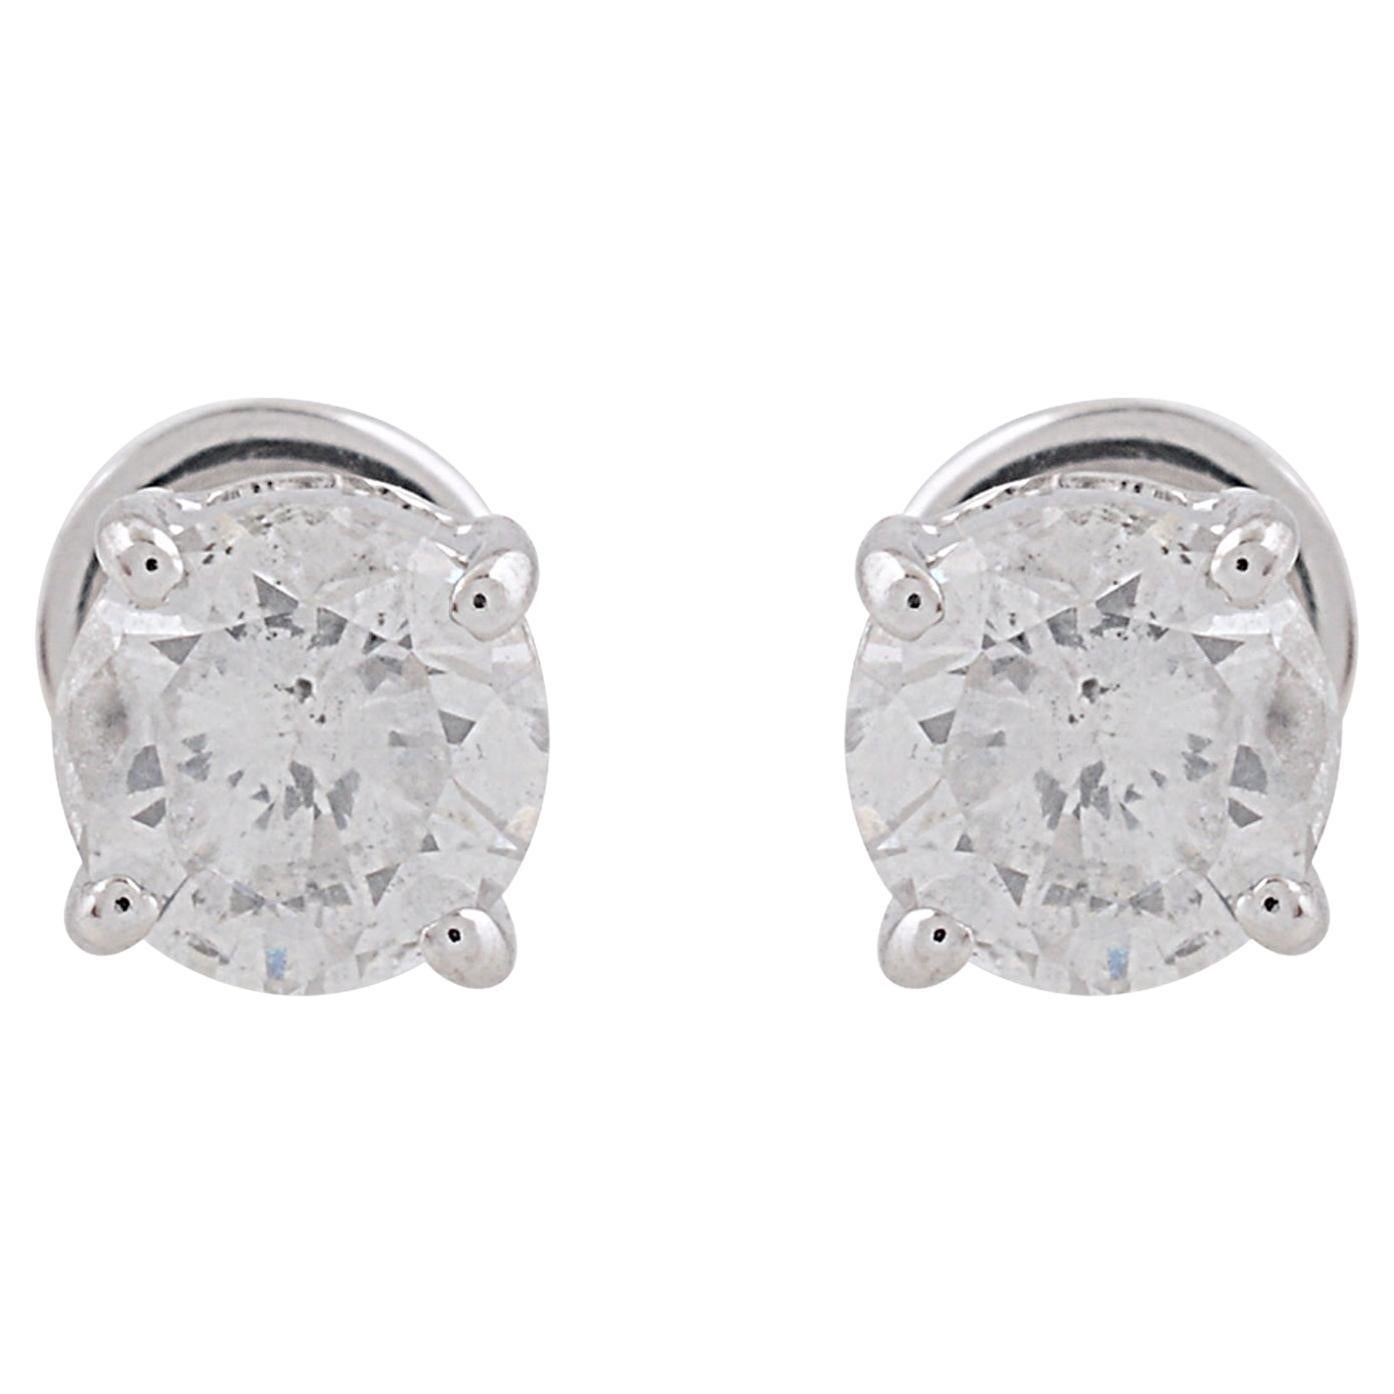 Set in solid 10k white gold, the minimalist design of these earrings allows the diamonds to take center stage, while the sleek and polished setting adds a touch of modern sophistication. The simplicity of the design ensures versatility, making these